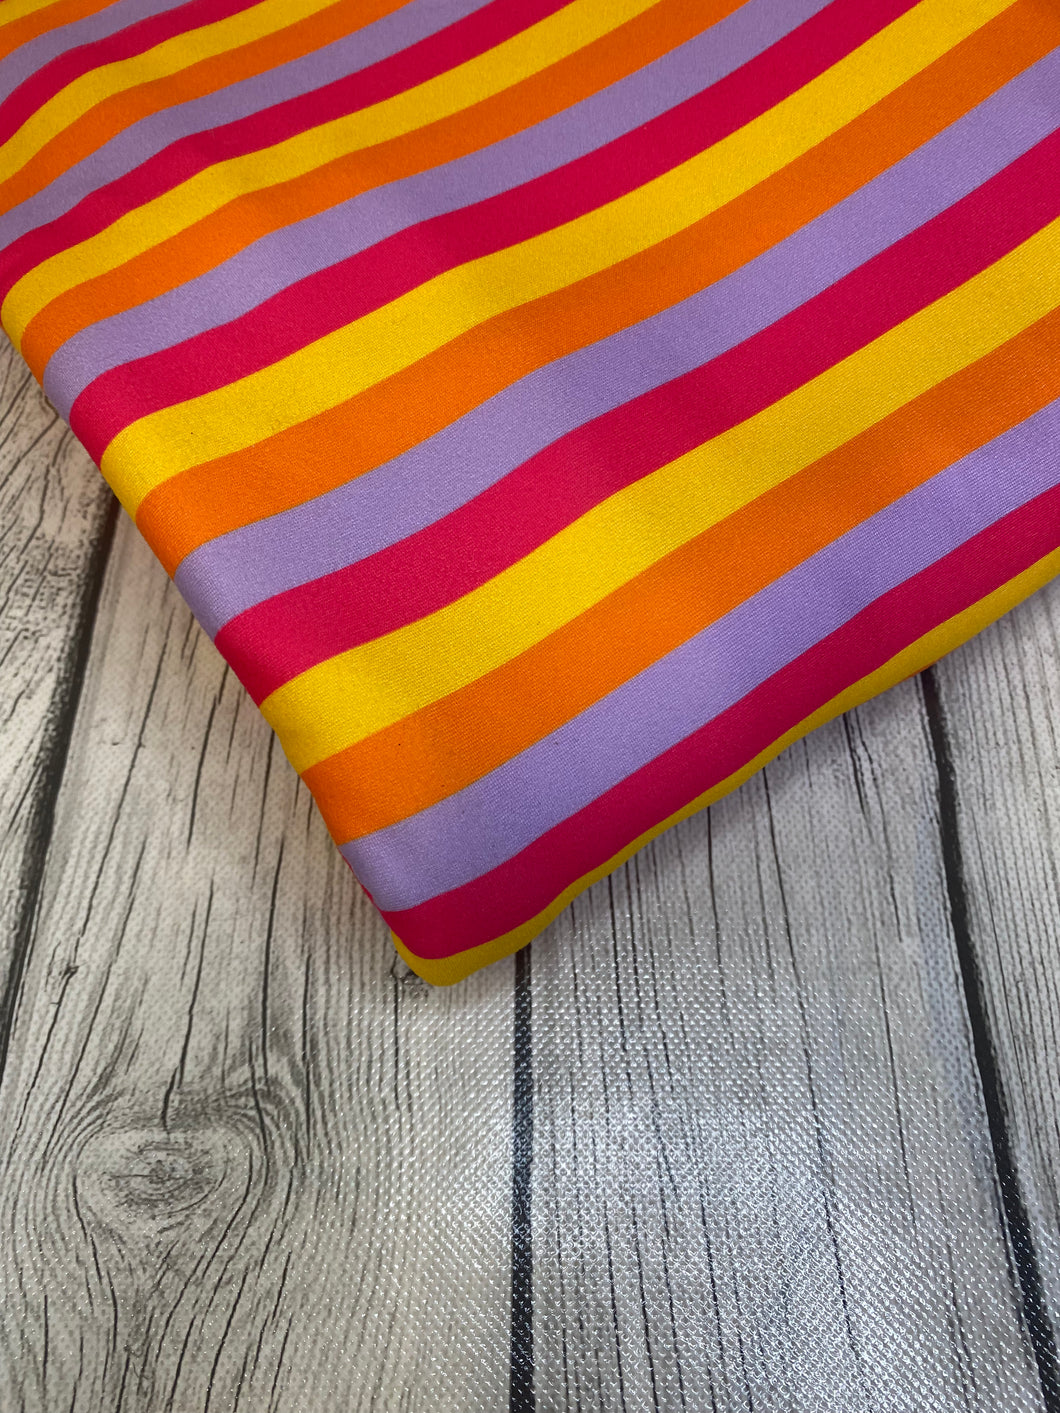 Ready to Ship DBP Fabric Bright Summer Stripes Shapes makes great bows, head wraps, bummies, and more.